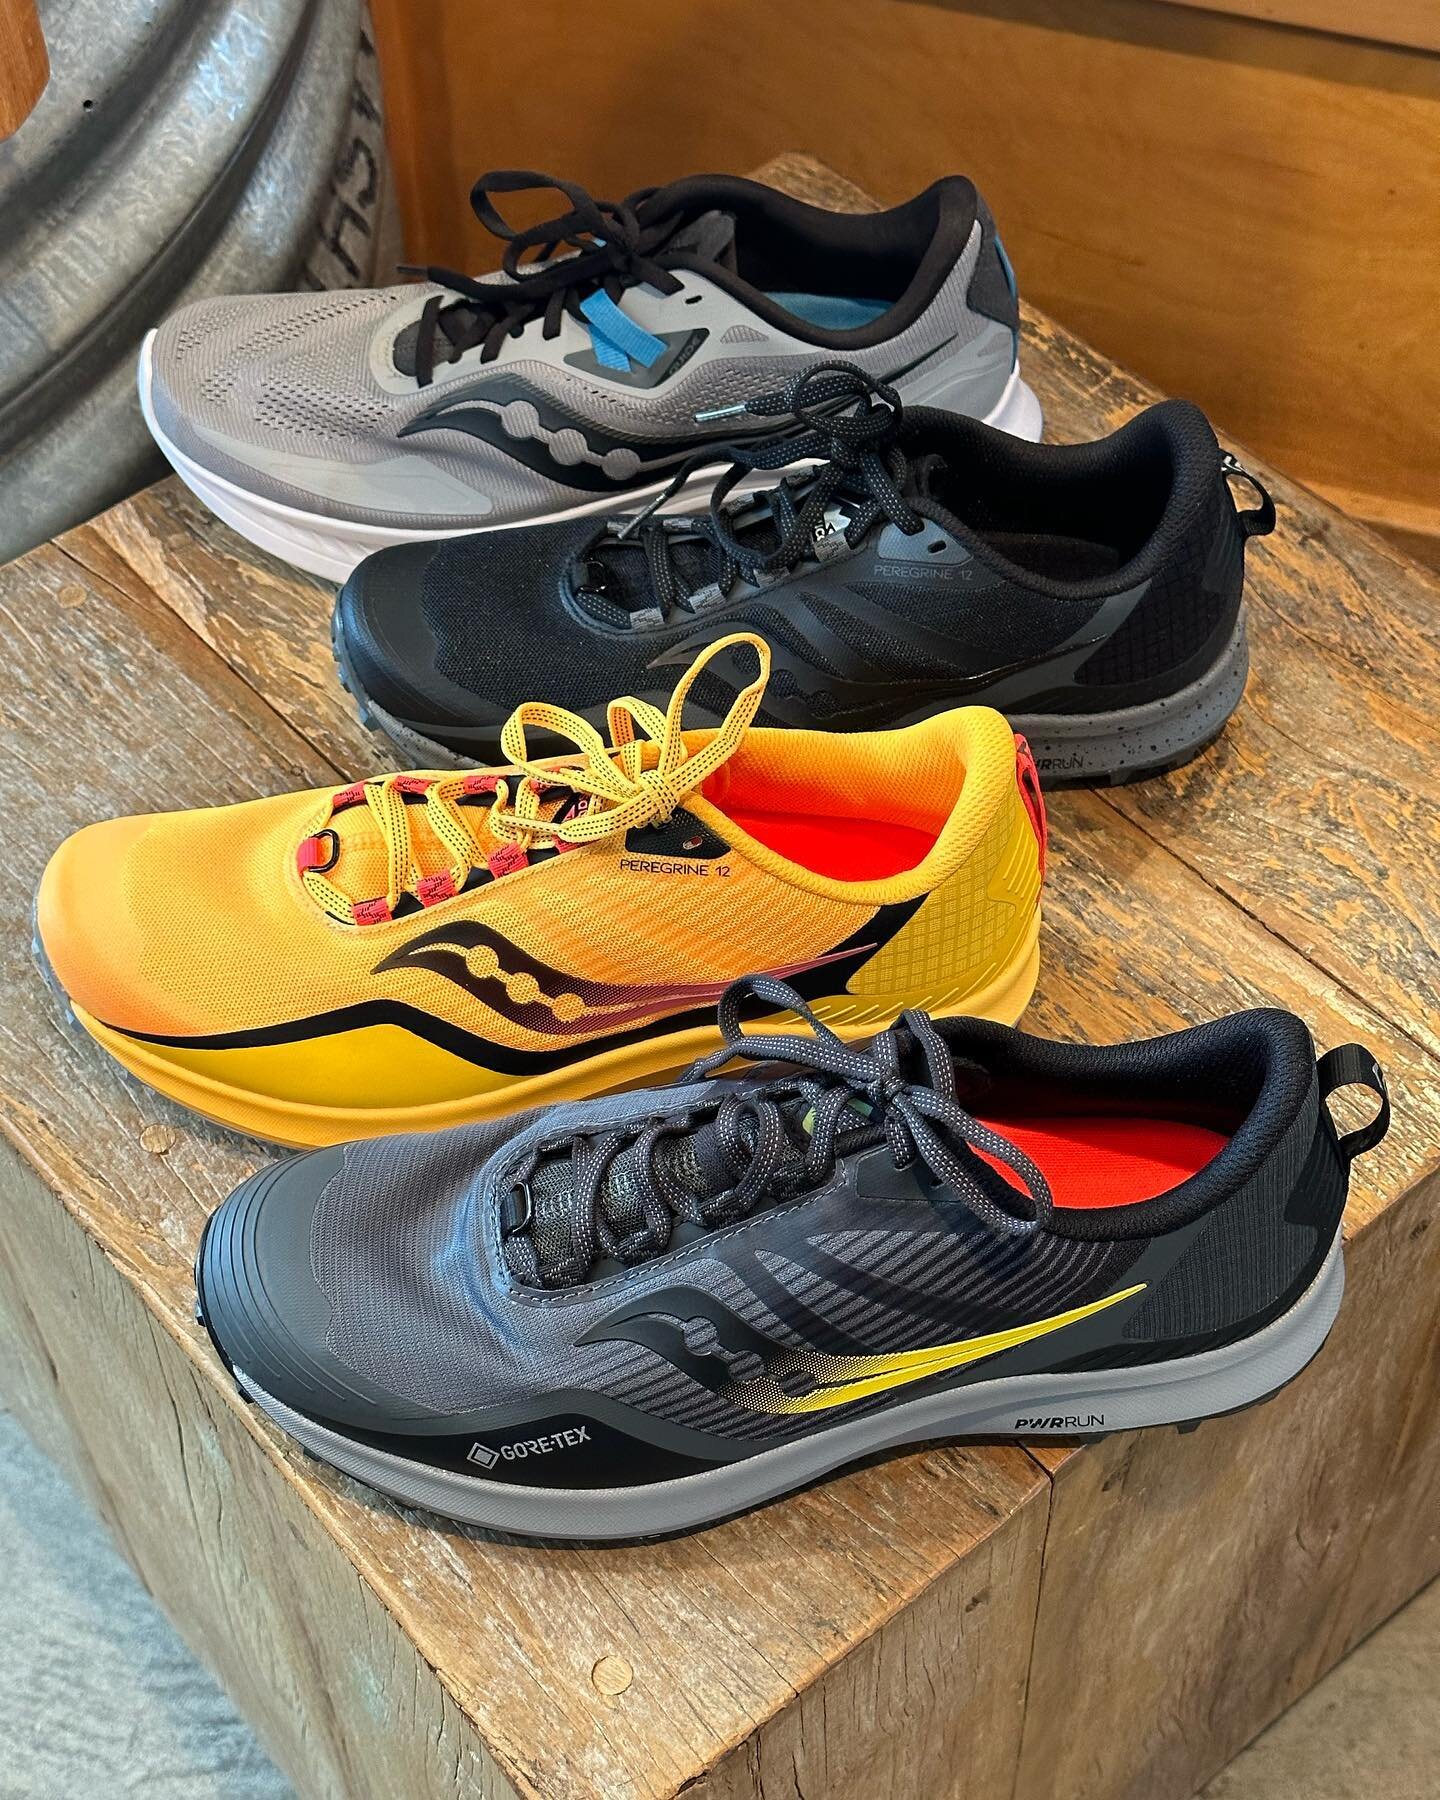 Select Men&rsquo;s and Women&rsquo;s Saucony running shoes 50%, break in a new pair before the big race. New models arriving soon. @angwintoangwishtrailevents #mysthelena #sthelenaca #downtownsthelena
#sportago #shoplocal #napavalley #hiking #napaval